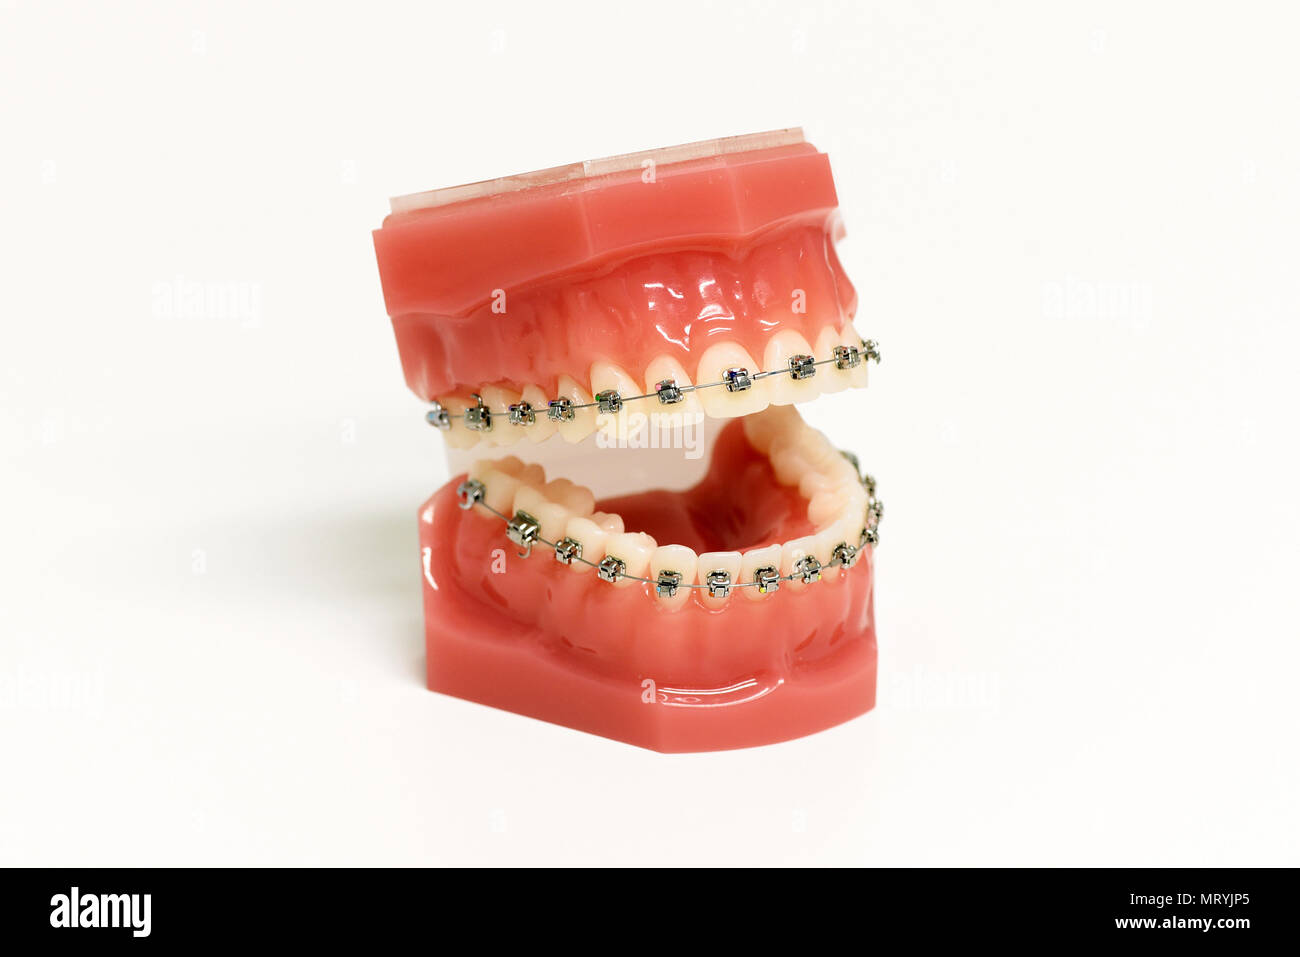 Dental model with orthodontic appliance showing metal braces attached to the upper and lower teeth to correct the bite by straightening and aligning t Stock Photo